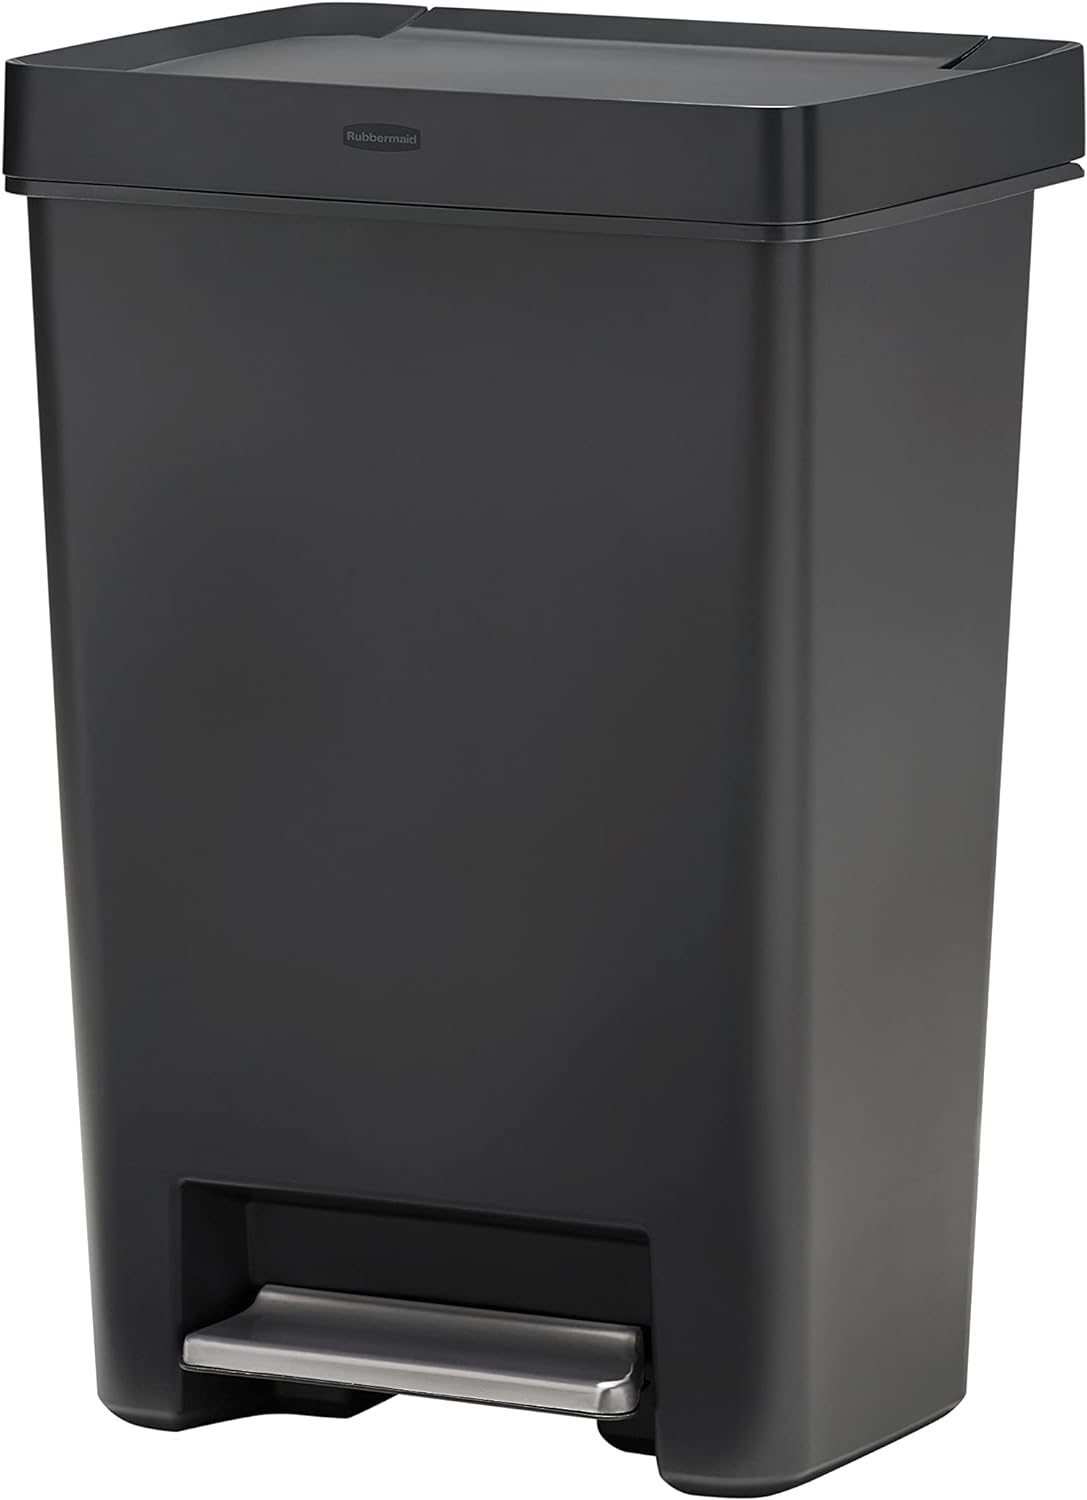 Rubbermaid Premier Series II Step-On Trash Can for Home and Kitchen, with Lid Lock and Slow Close, 13 Gallon, Charcoal Style:Series II